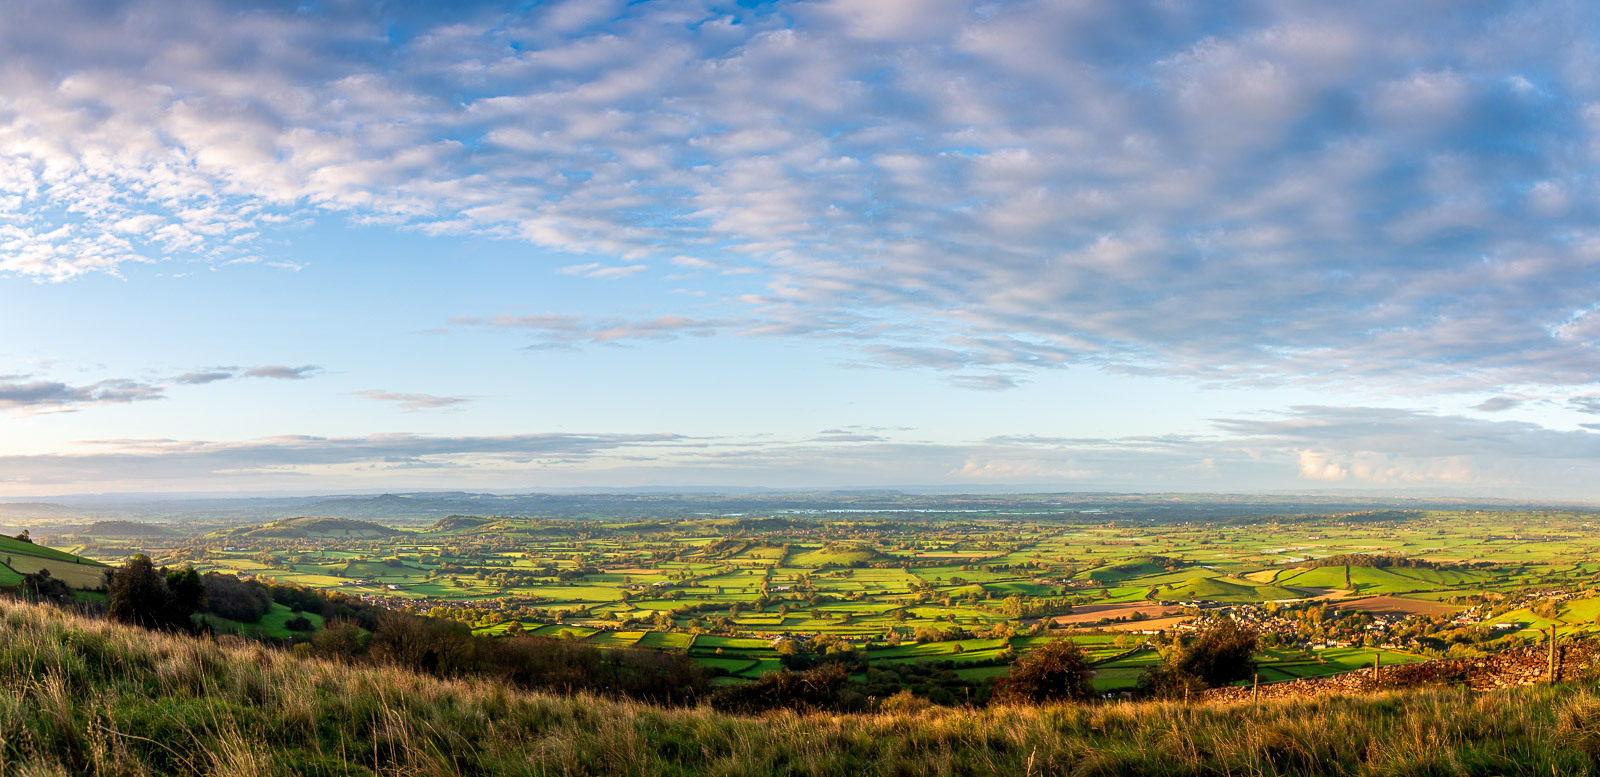 Looking over the Axe Valley - From Cooks Fields, Mendip Hills, Somerset, UK. ID JB1_7796HP